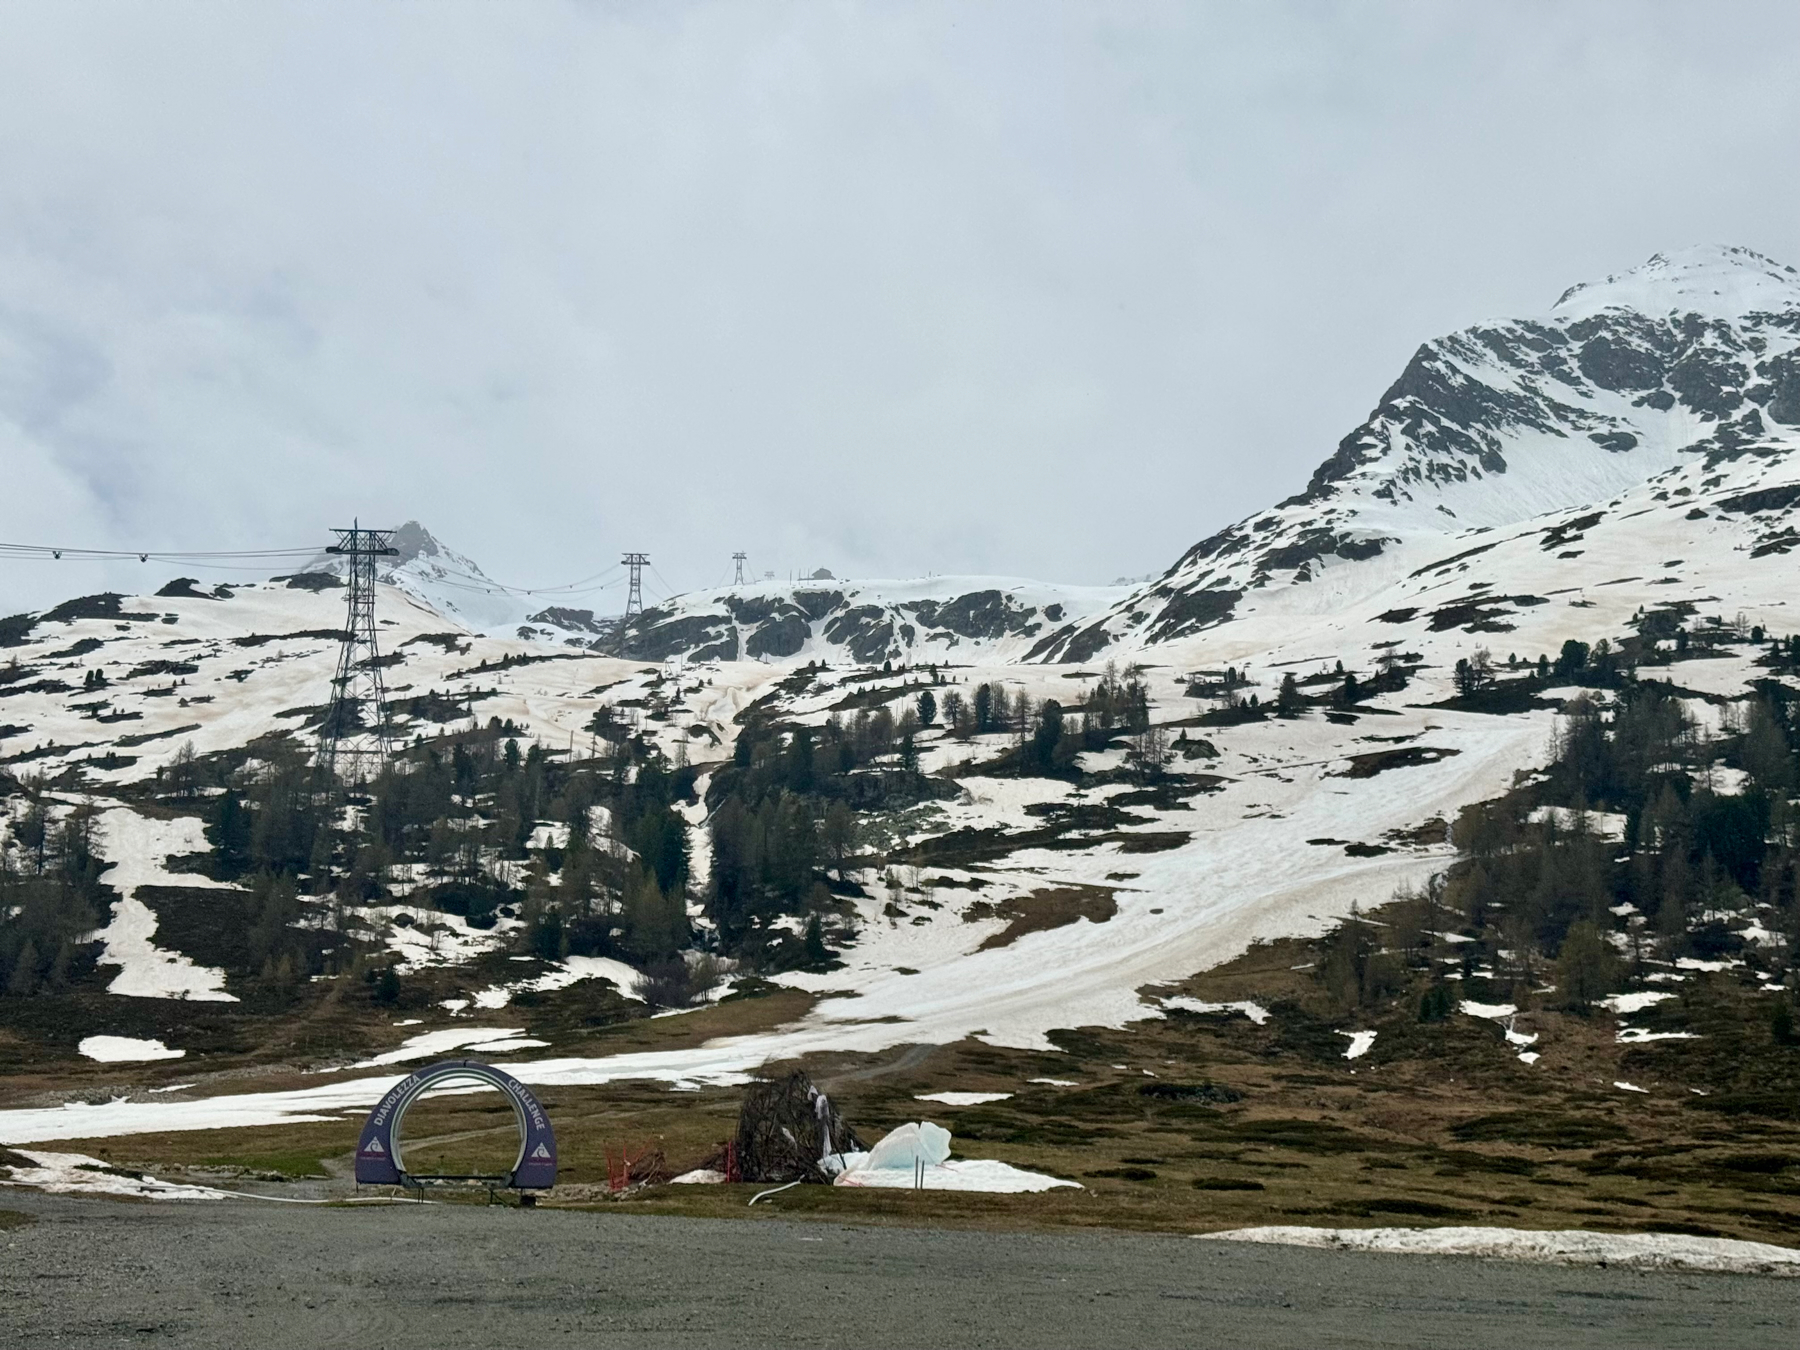 Snow-patched alpine landscape with a ski chairlift system and a partial view of a tunnel structure in the foreground. Cloudy skies suggest overcast weather.